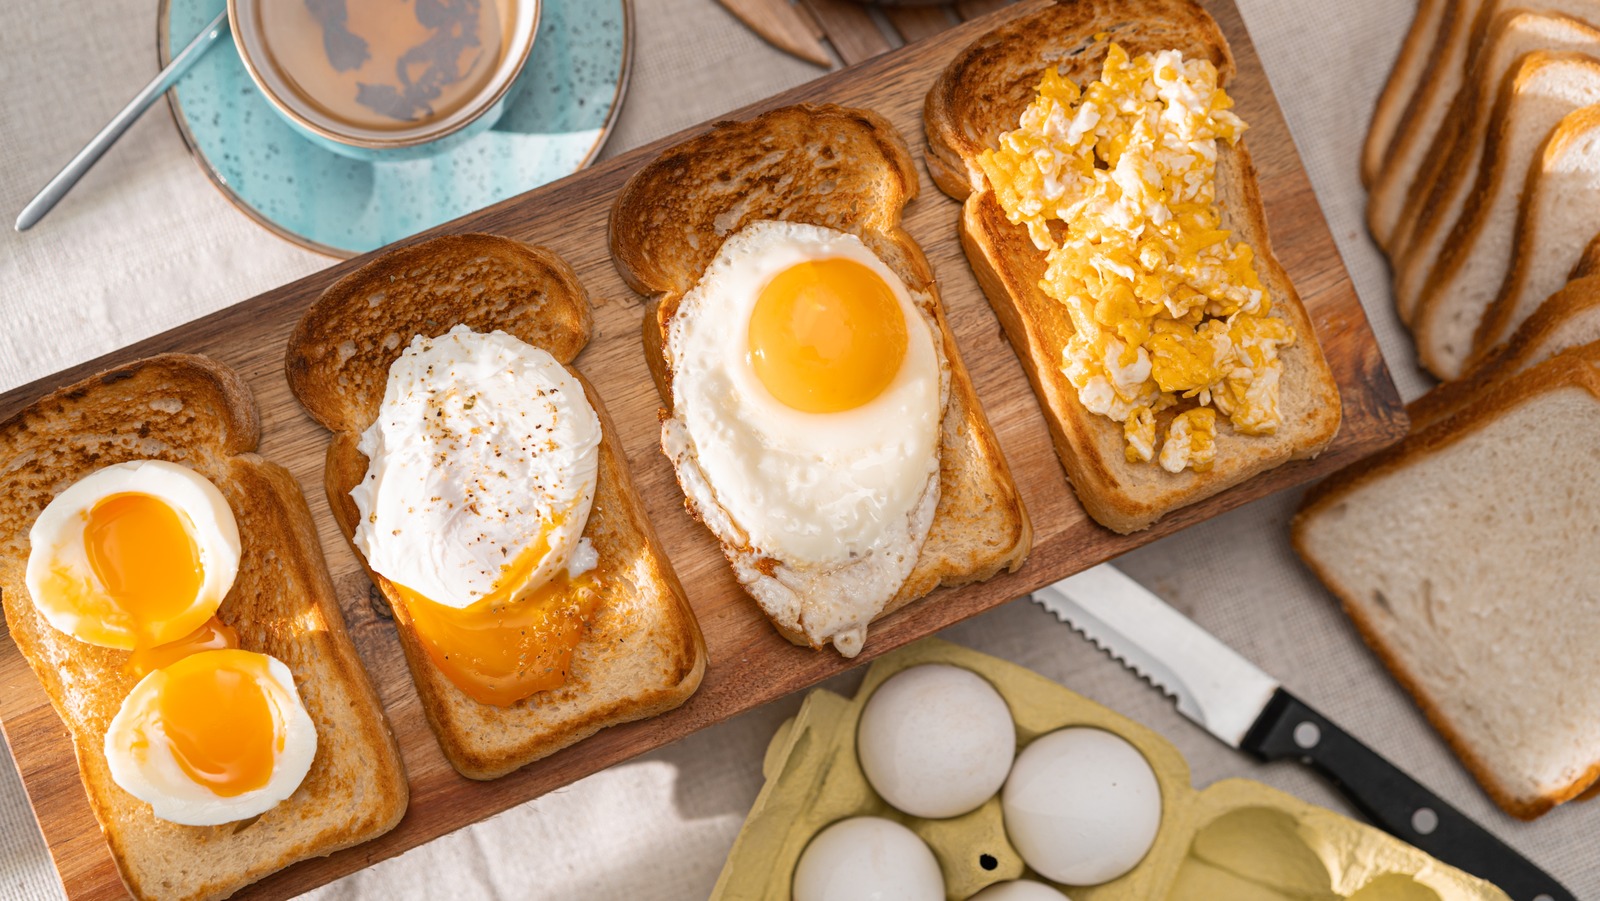 https://www.tastingtable.com/img/gallery/14-ways-to-cook-eggs-explained/l-intro-1666898871.jpg